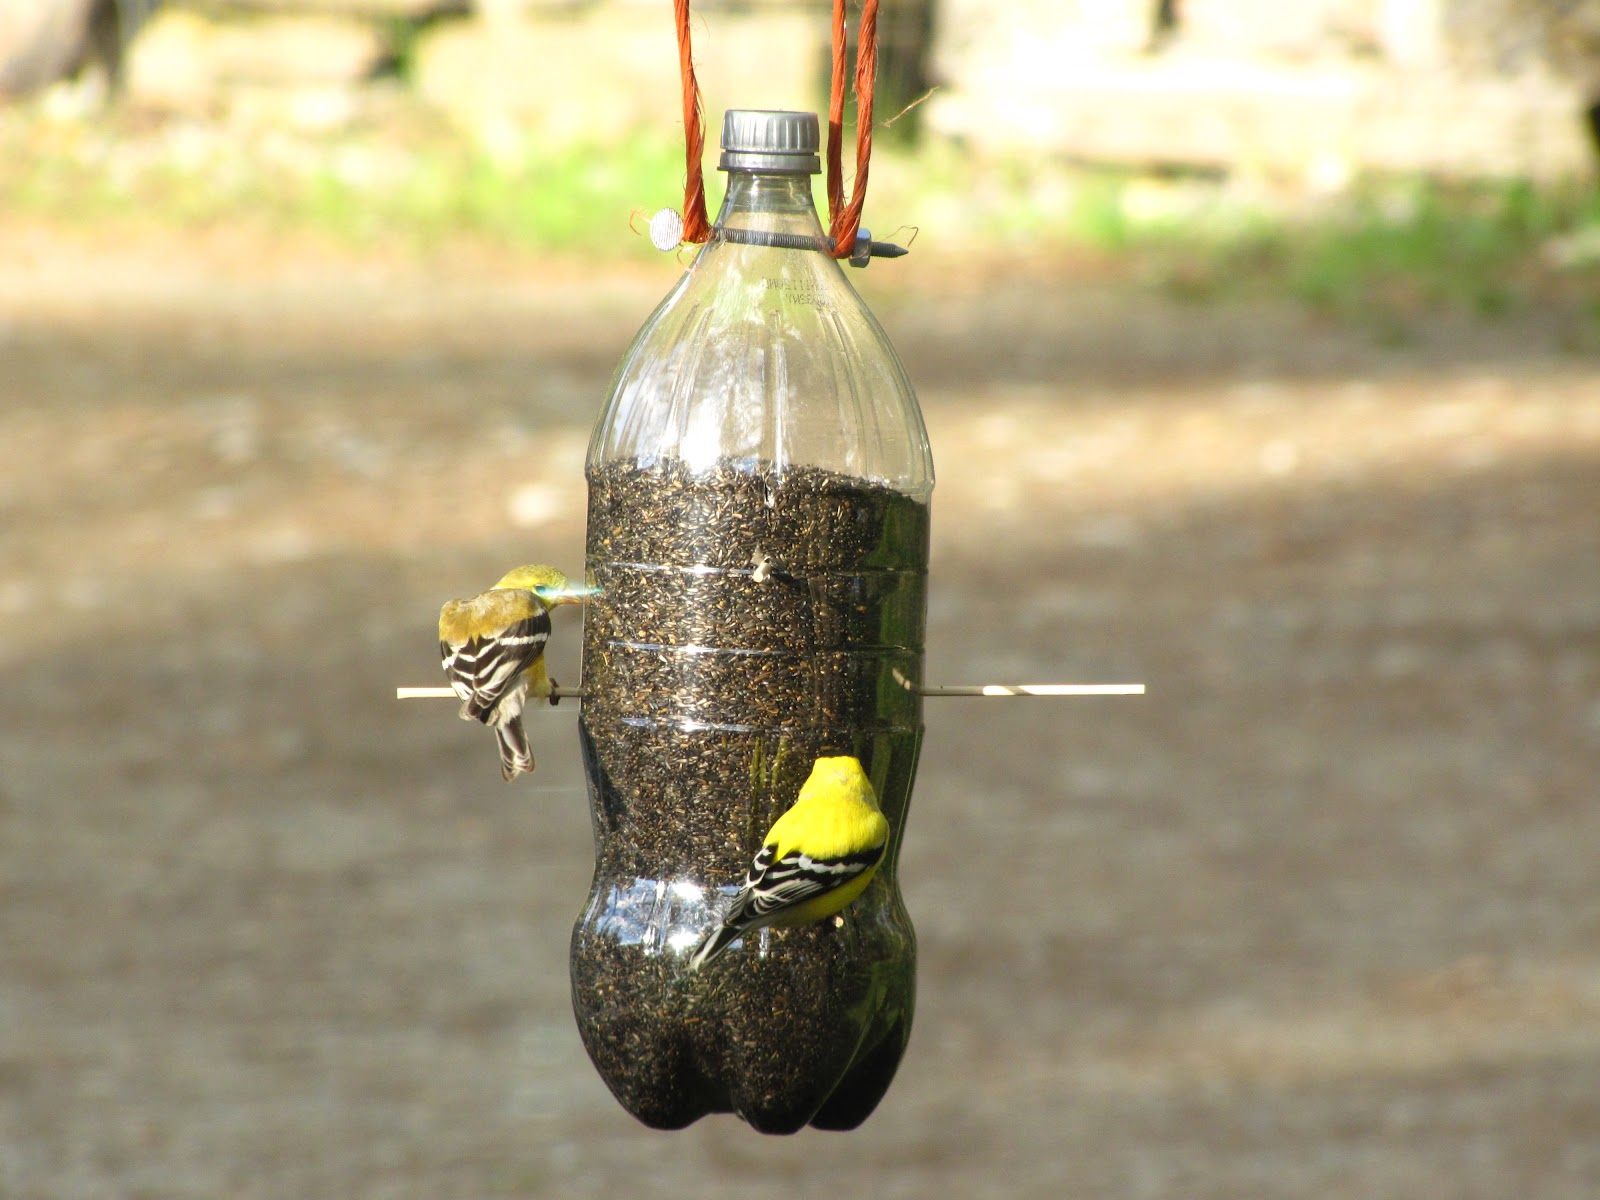  feeder today. She made it using a 2 liter soda bottle and wooden